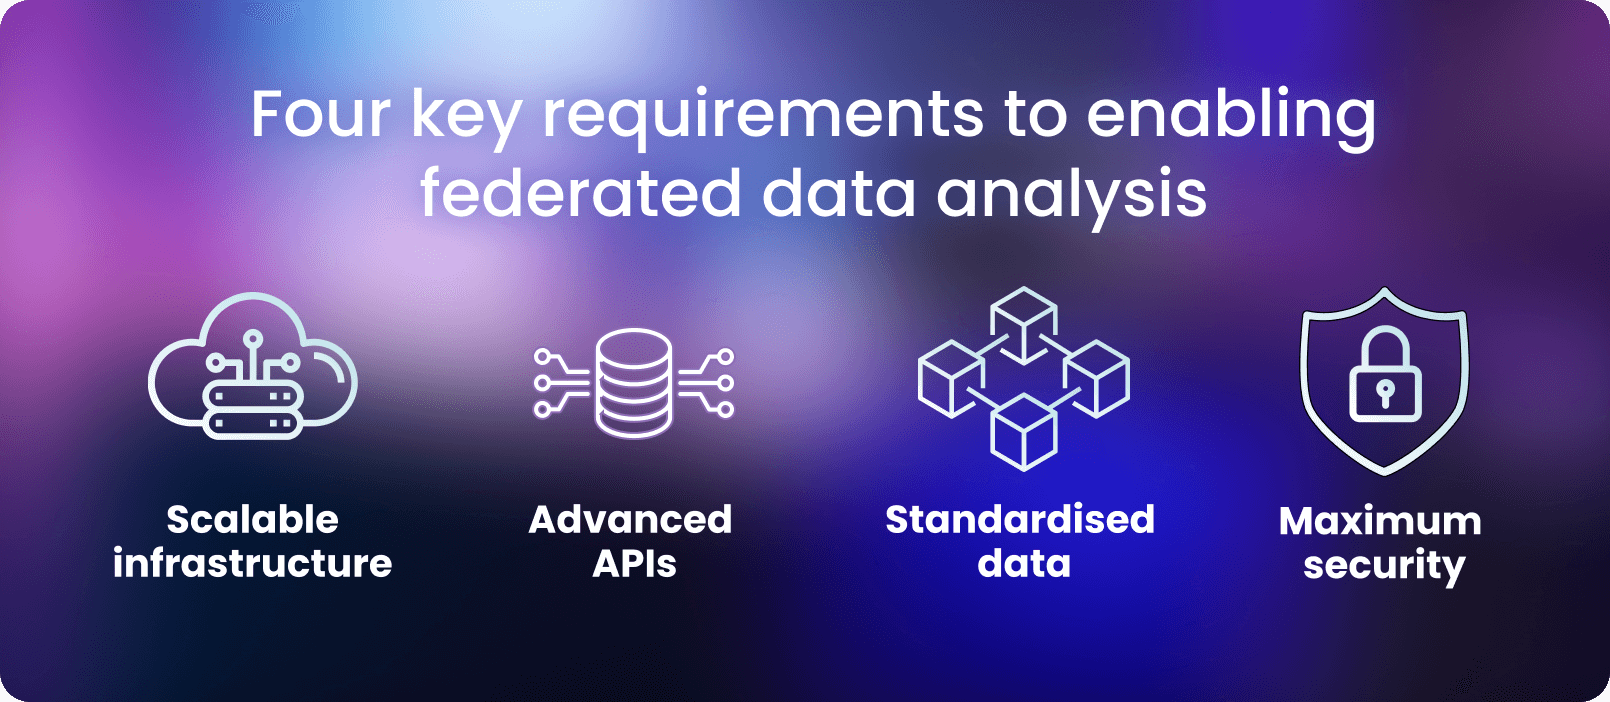 Four key requirements to enabling federated data analysis (1)